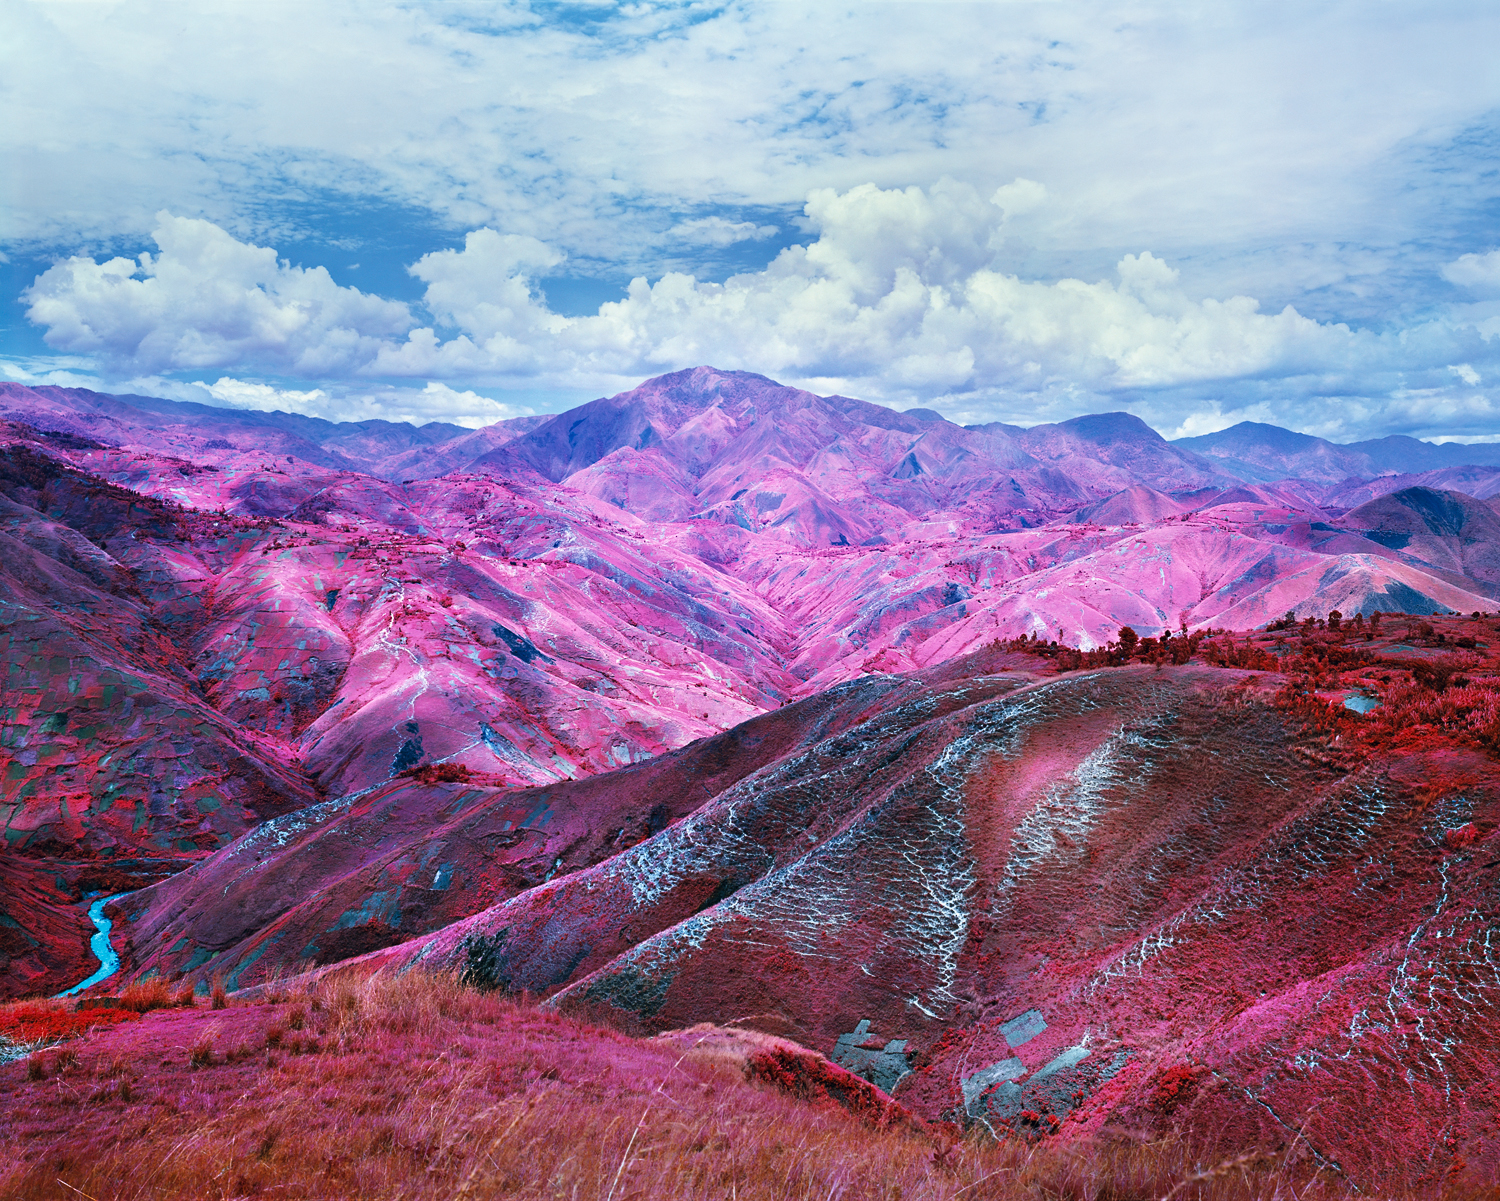 Richard Mosse, Remain in Light, 2015. Digital c-print, 40 x 50 inches. © Richard Mosse. Courtesy of the artist and Jack Shainman Gallery, New York